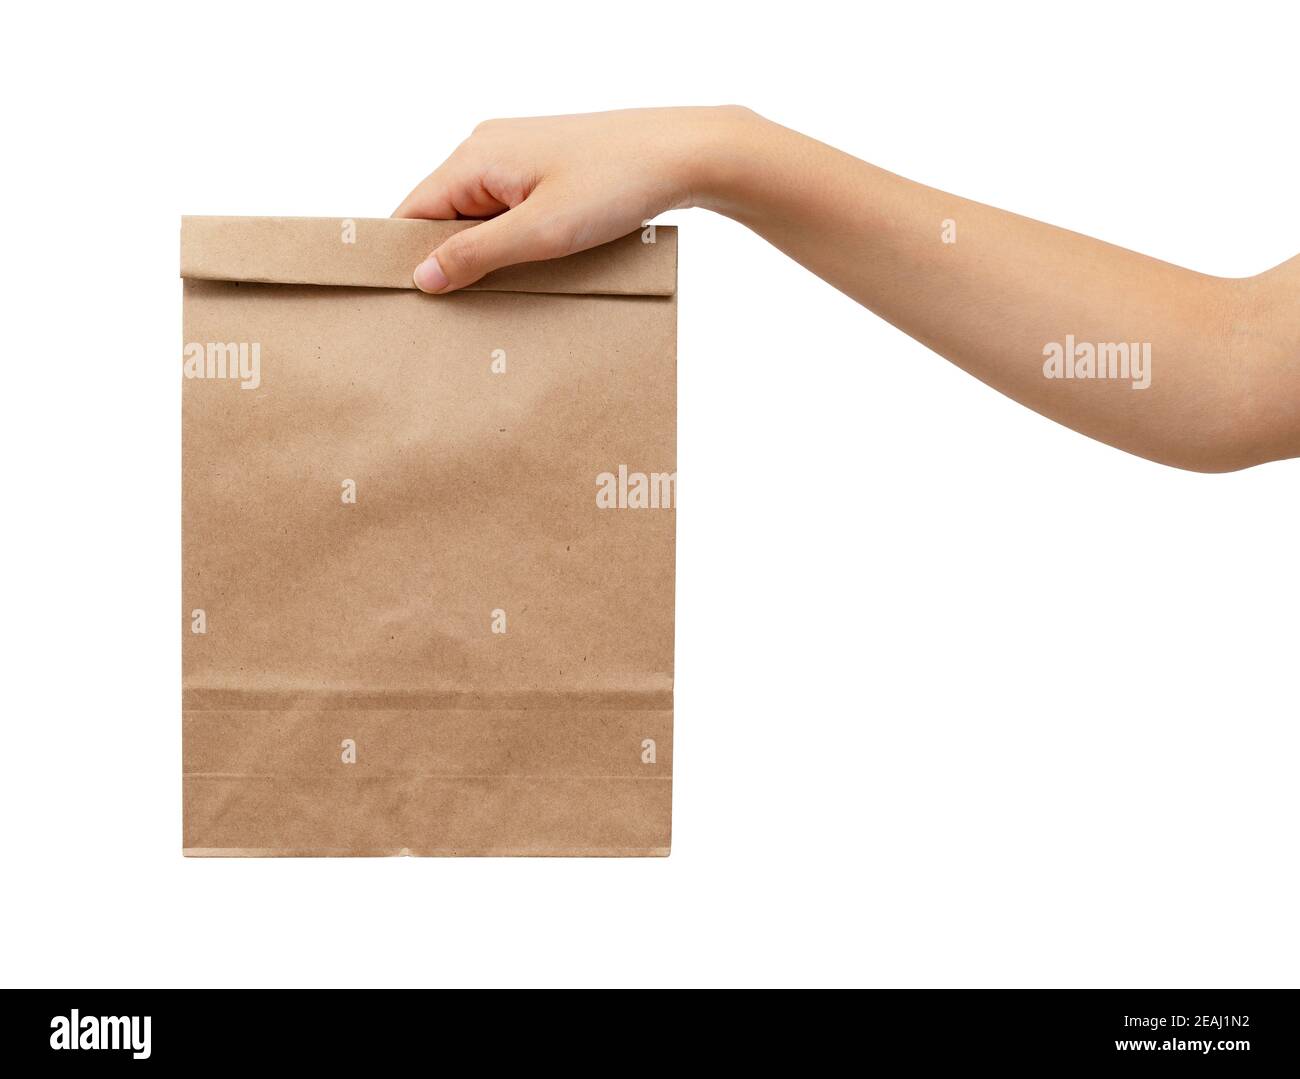 Woman's hand holding a paper bag Stock Photo